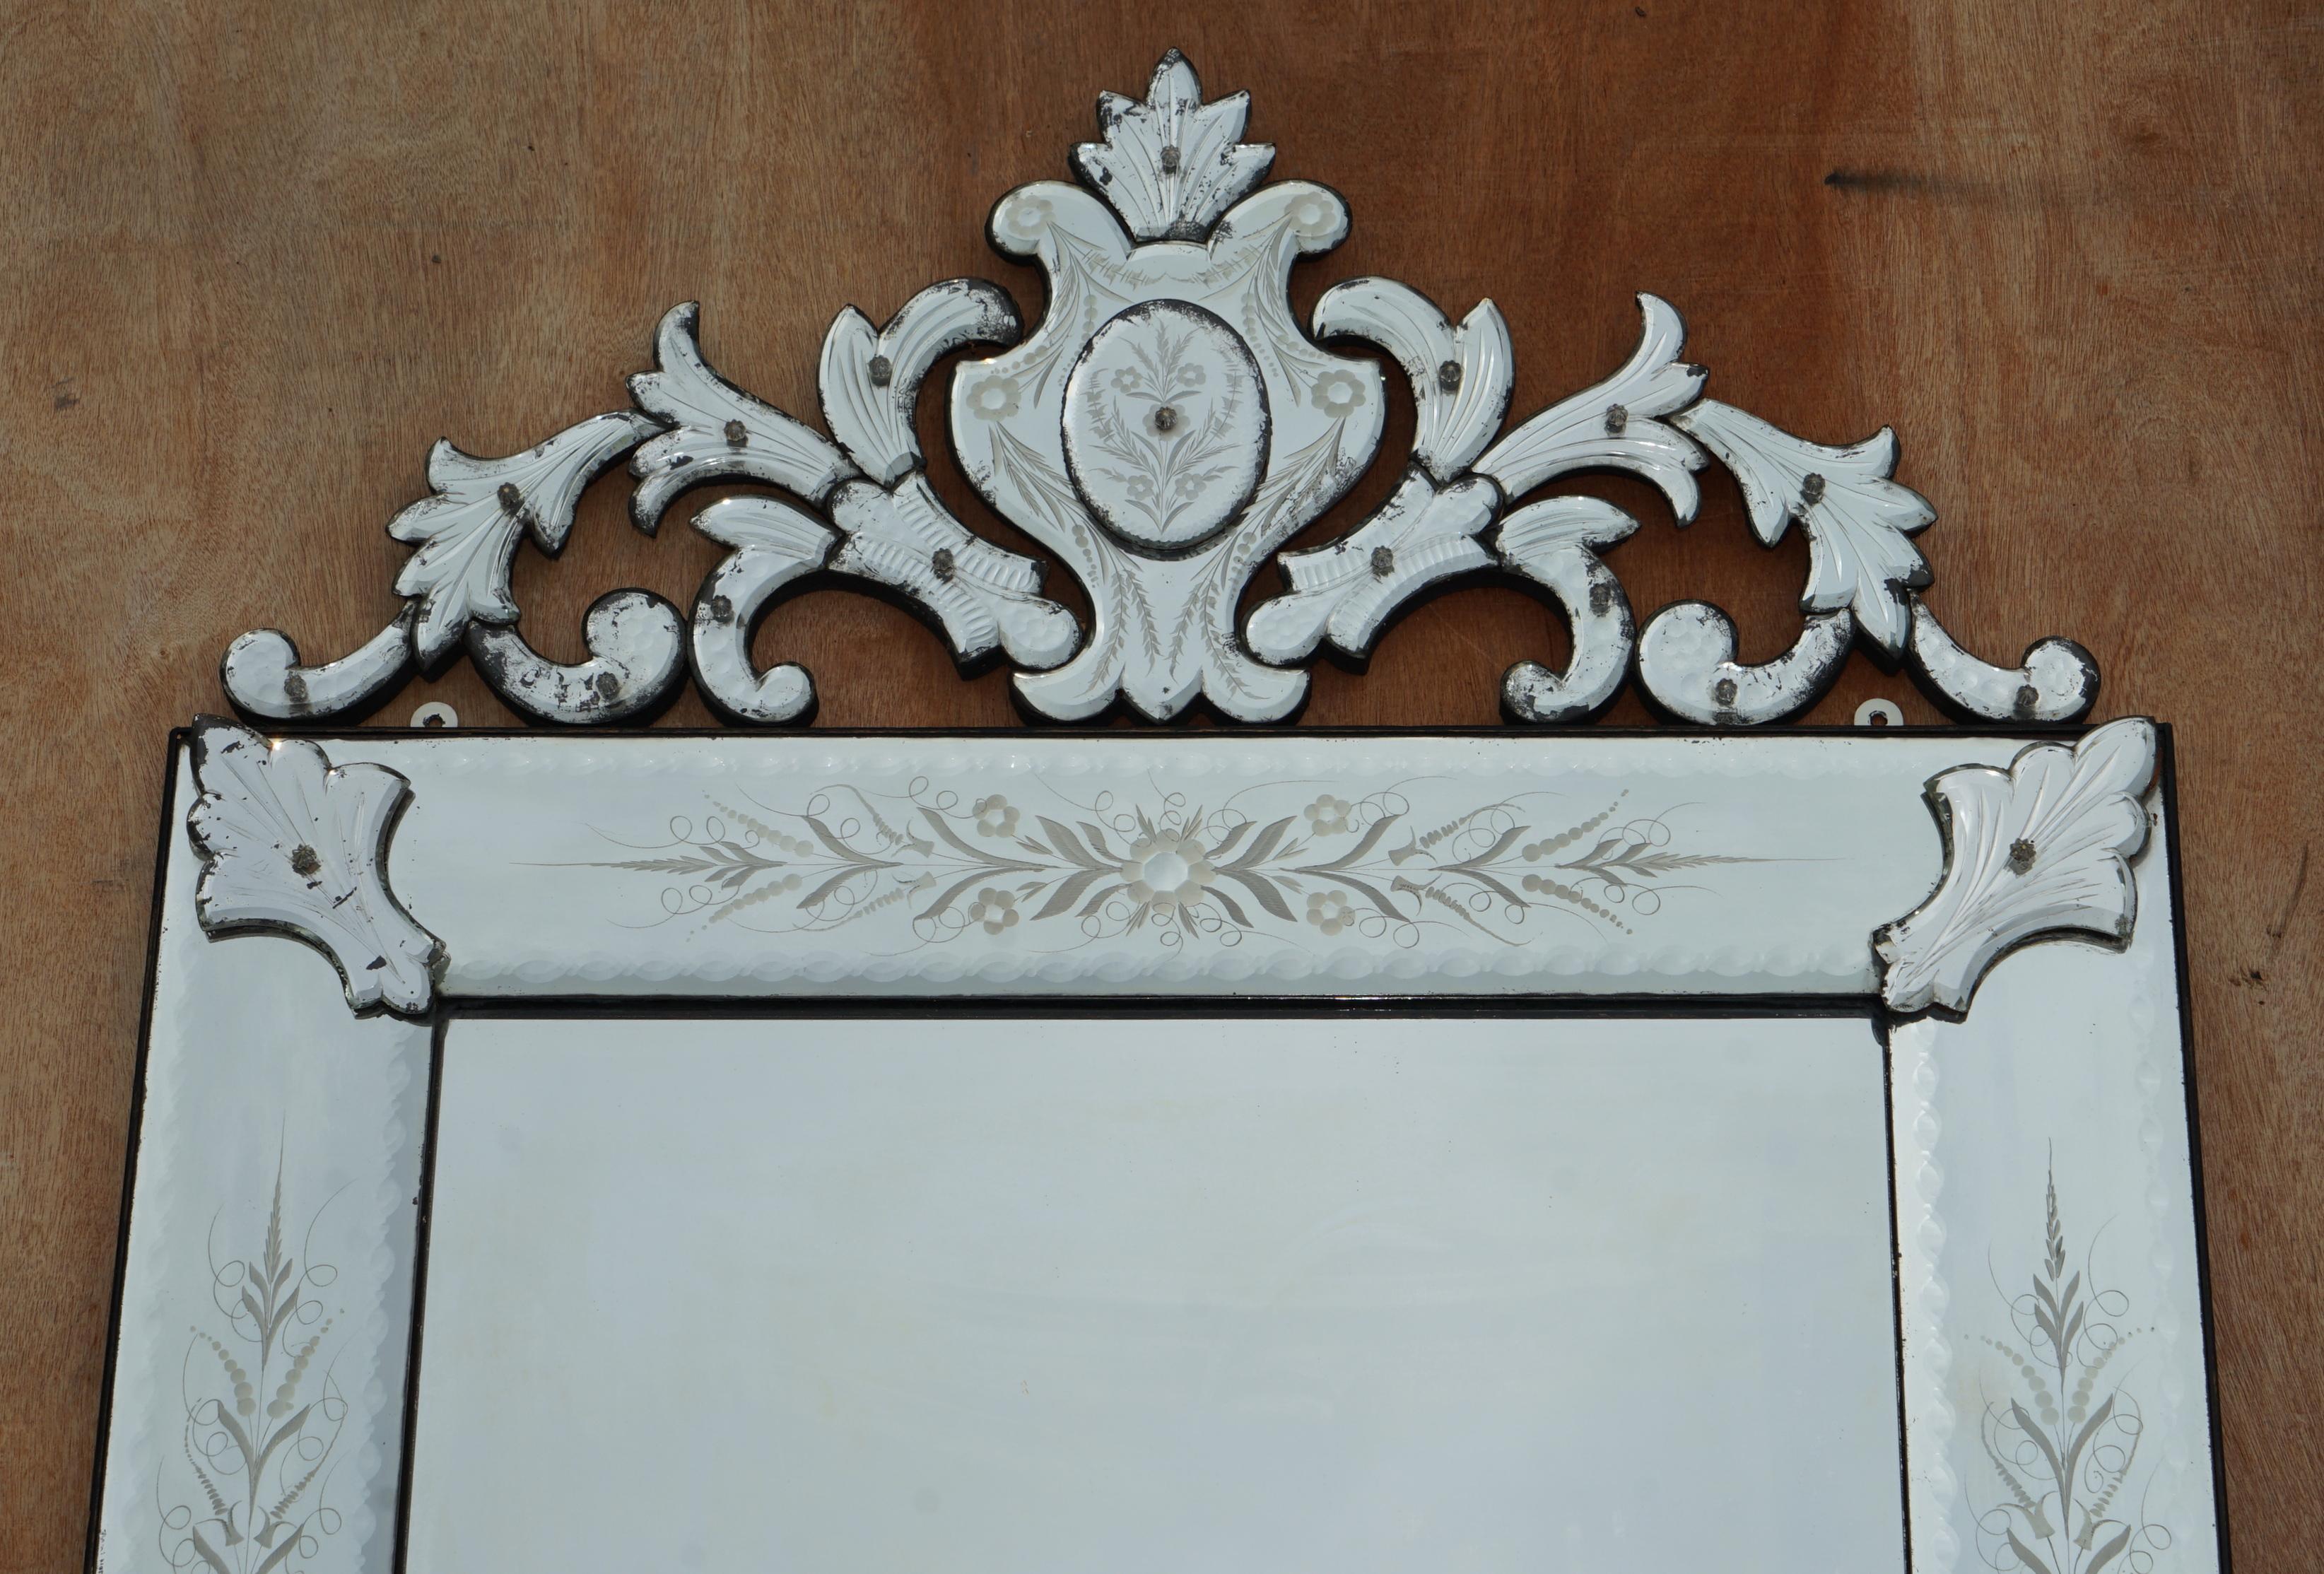 We are delighted to offer for sale this stunning, very large original circa 1880’s Venetian etched mirror with bevelled edge frame and wrought iron outer casing.

A very good looking well-made and decorative wall mirror, this is a really rather